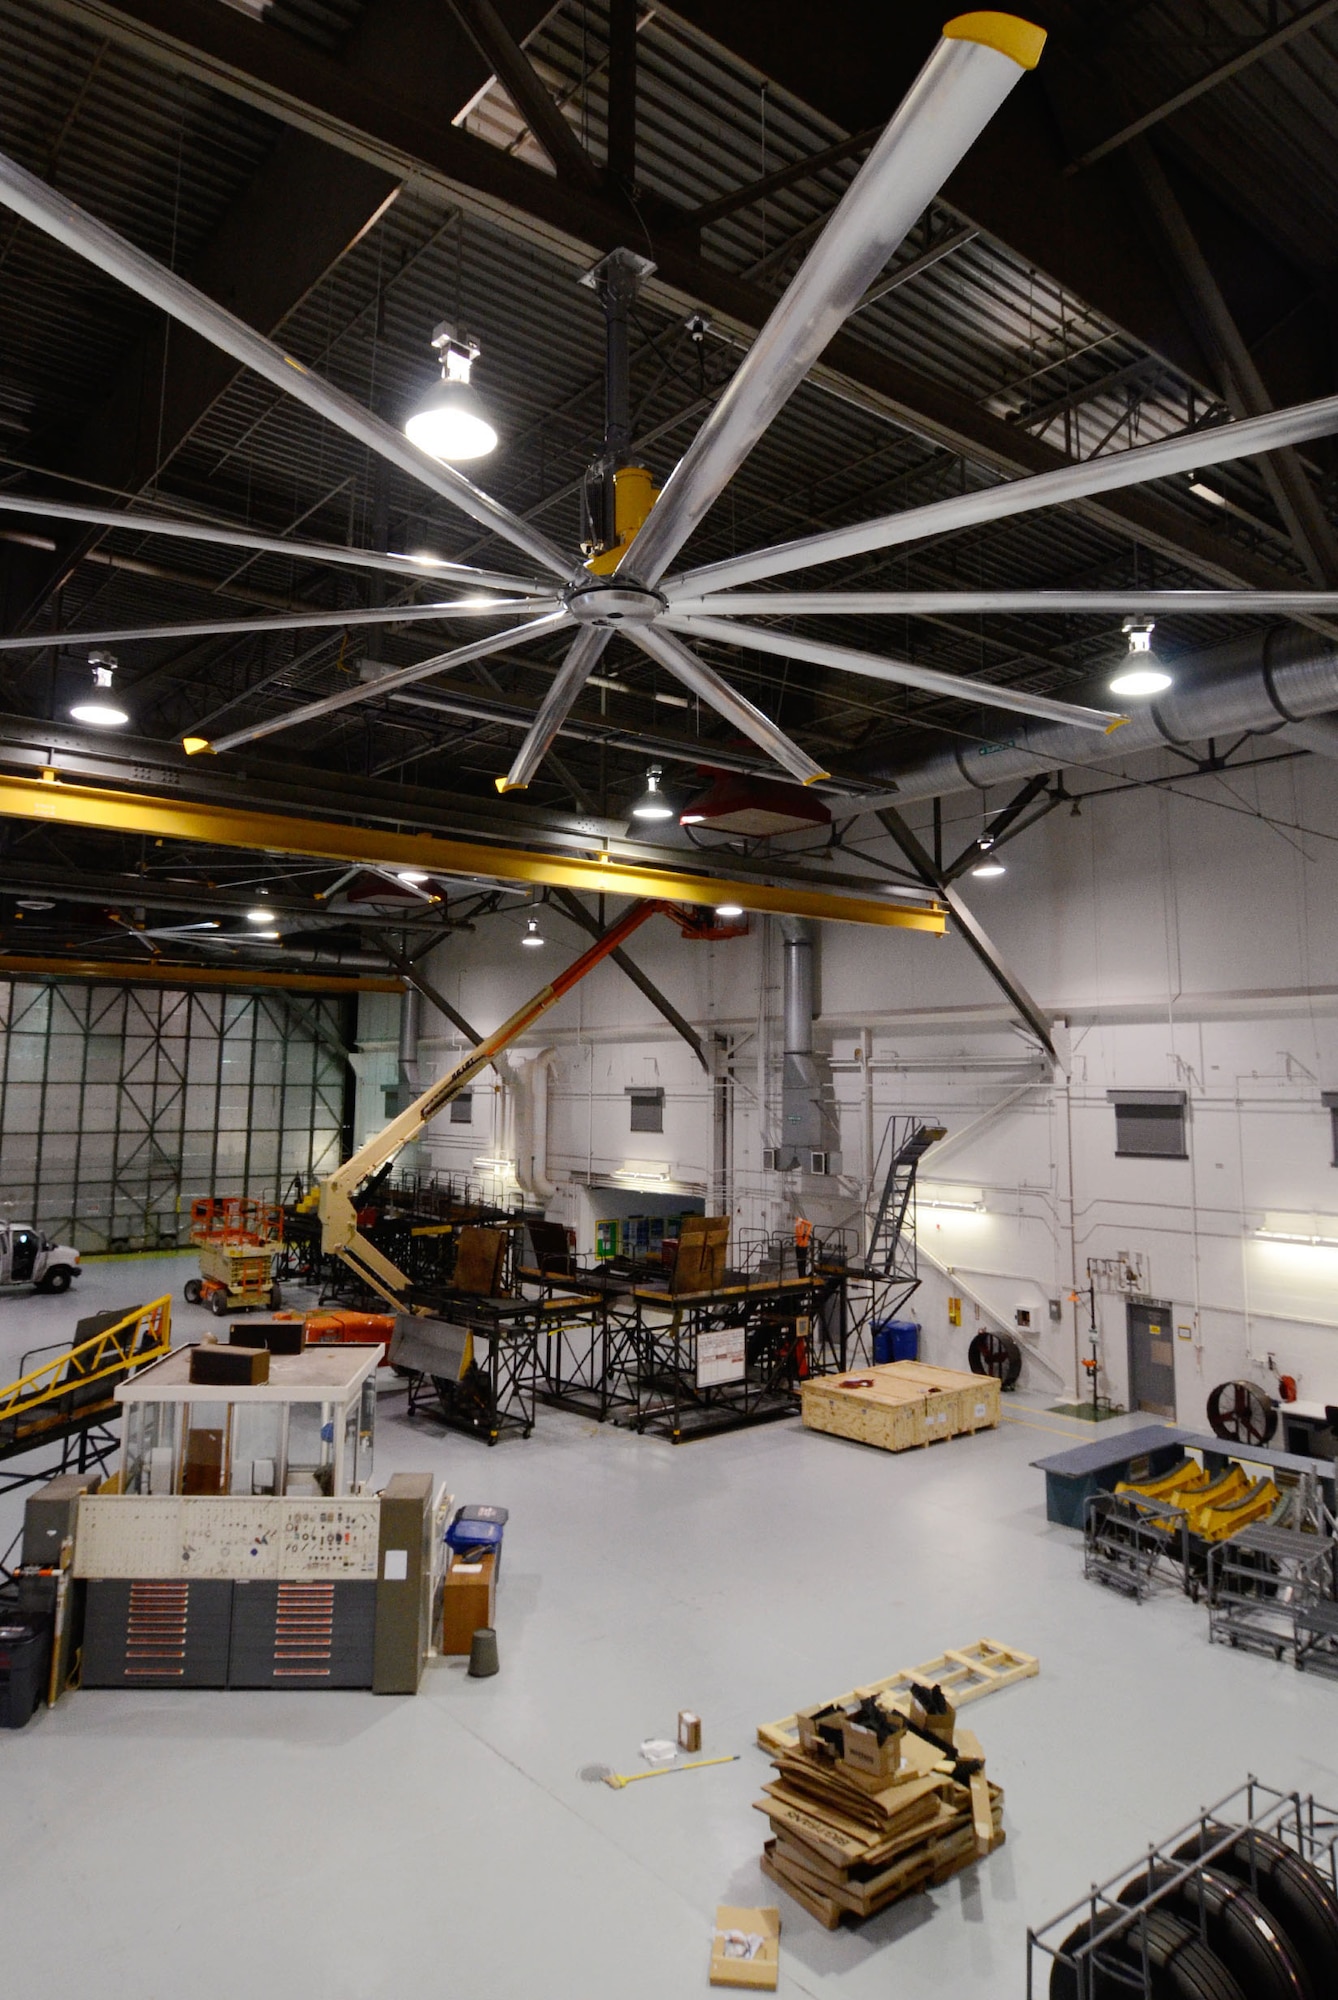 The Installation of large 24-foot ceiling fans provide aircraft maintenance personnel with seasonally comfortable air circulation throughout  hangar bay 3 in building 838 here Oct. 27. (U.S. Air Force photo/Don Peek)